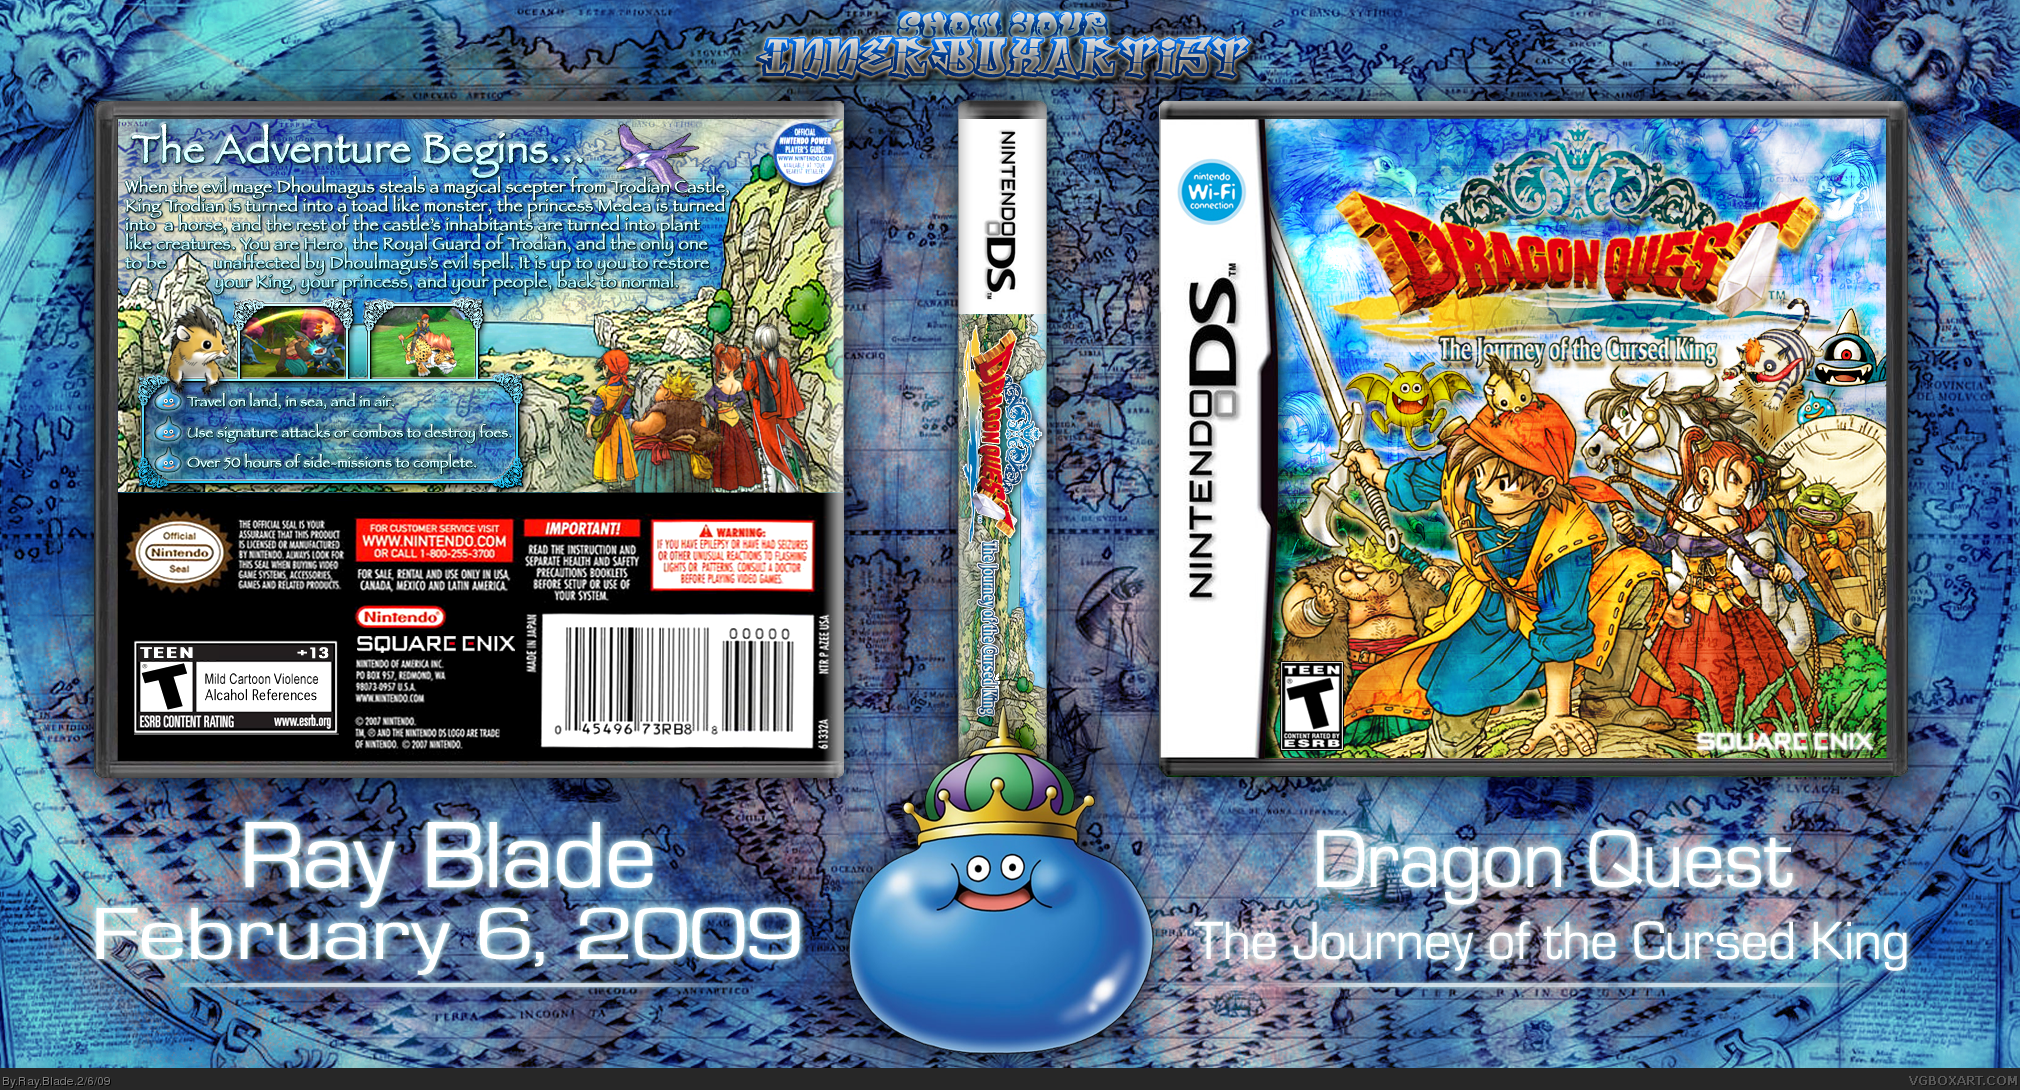 Dragon Quest: The Journey of the Cursed King box cover